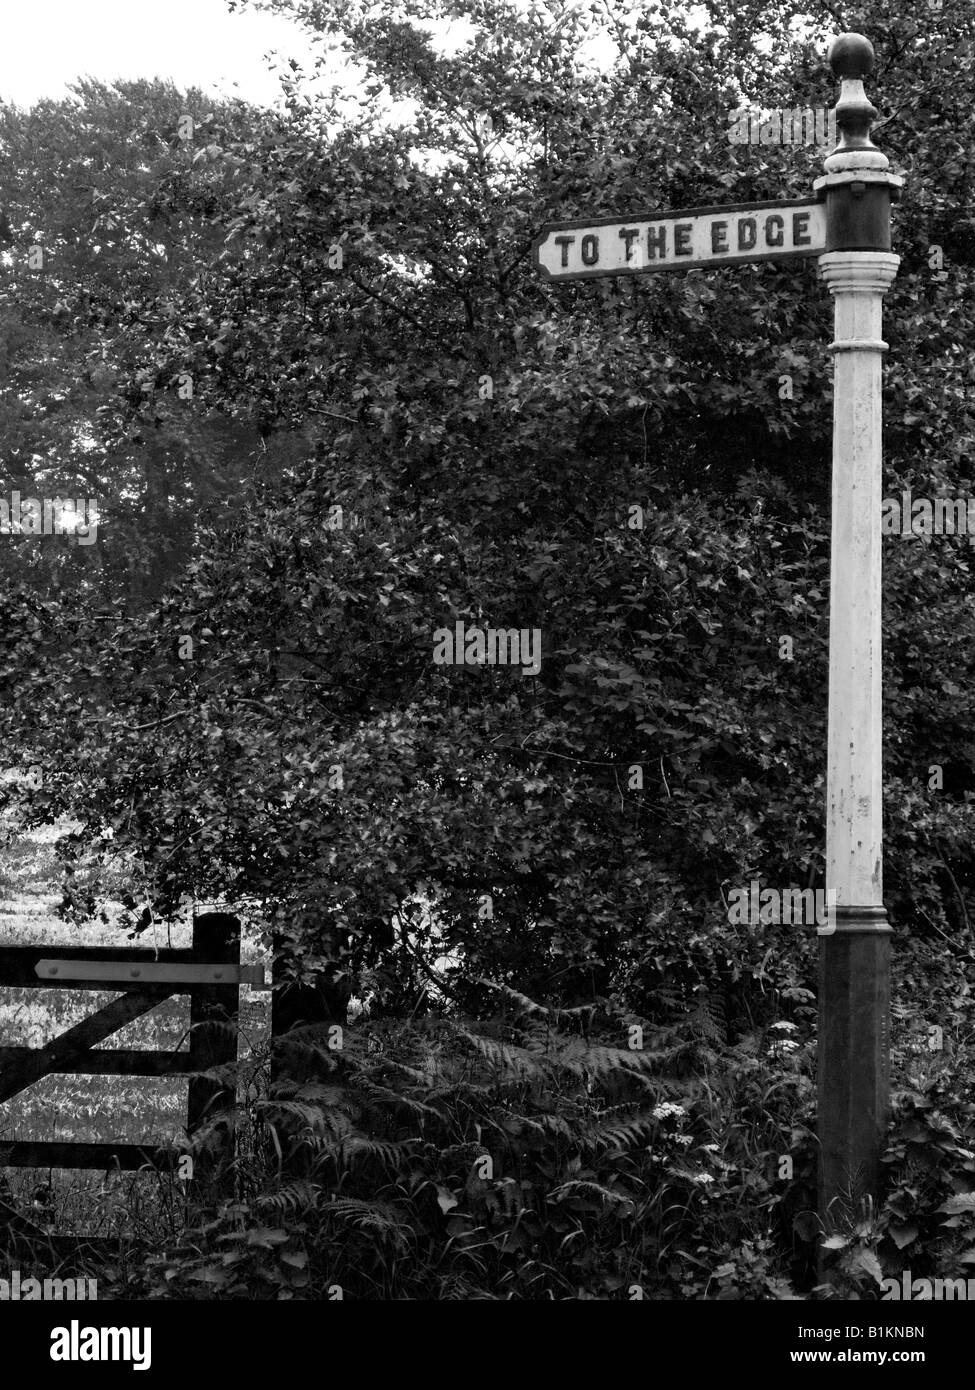 Old iron sign post saying TO THE EDGE. At Alderley Edge, in Cheshire, near Manchester. Black and white photograph. Monochrome. Stock Photo